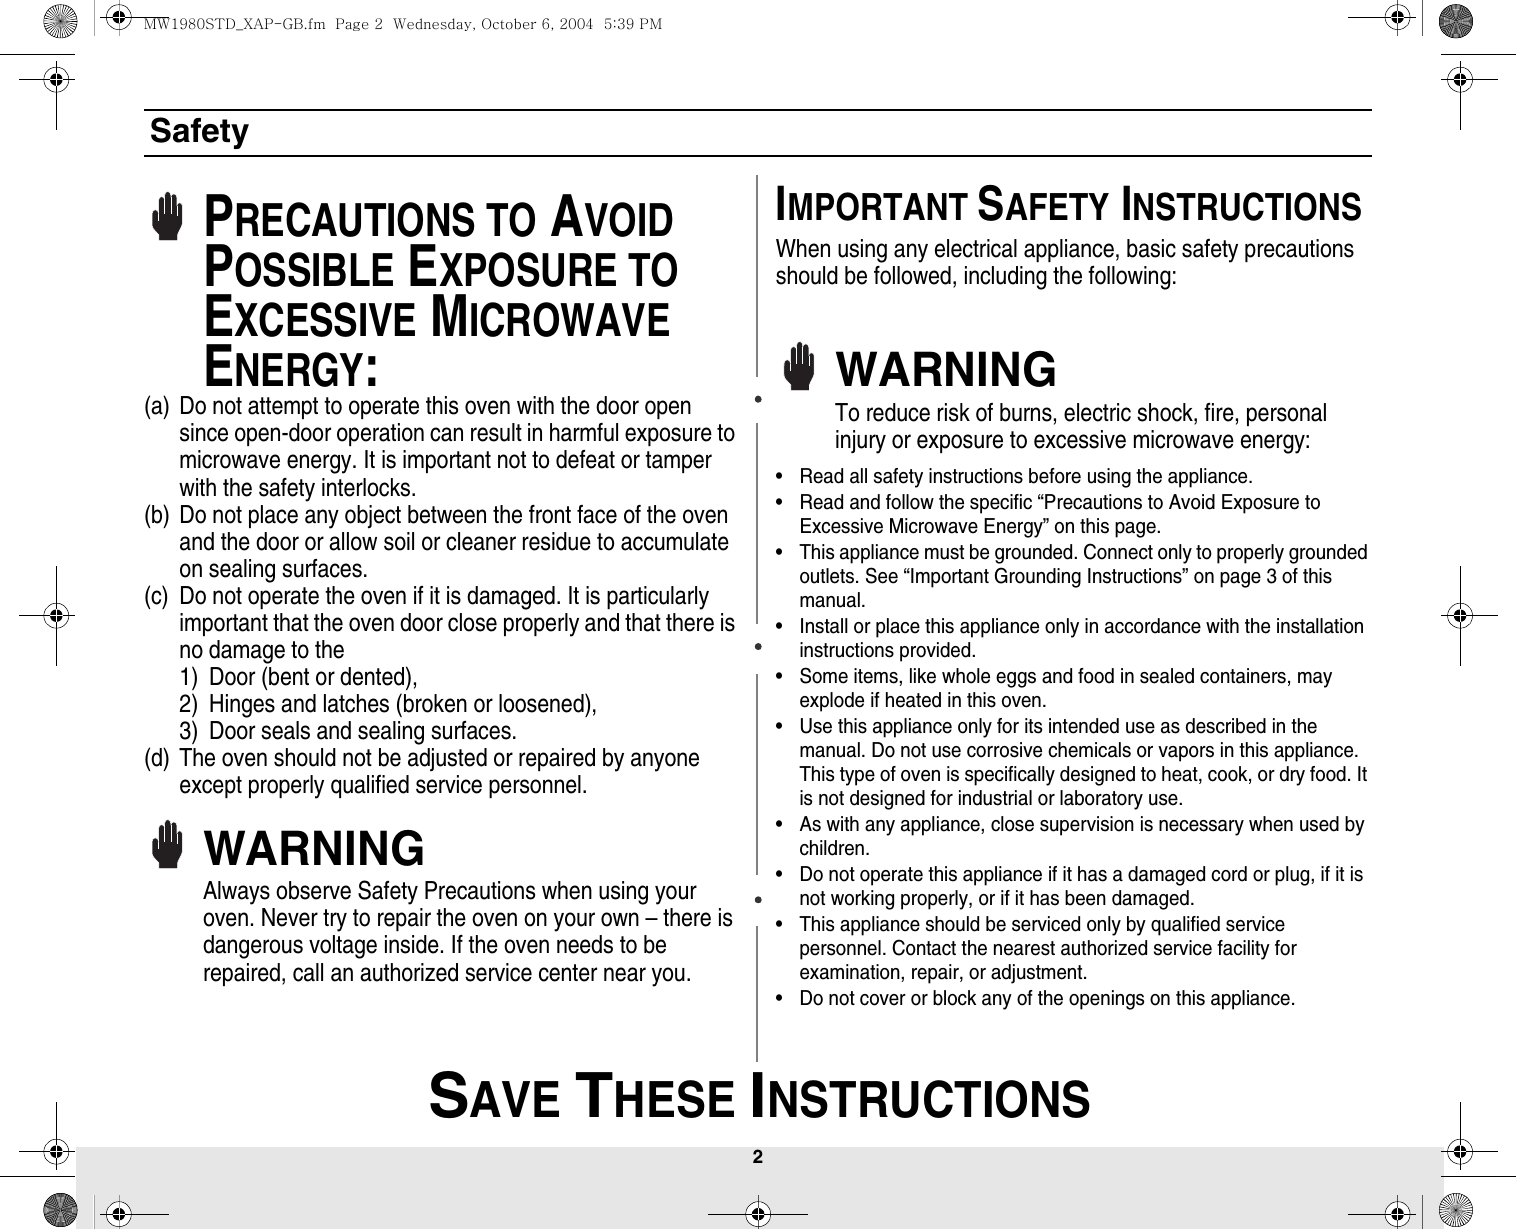 2 SAVE THESE INSTRUCTIONSSafetyPRECAUTIONS TO AVOID POSSIBLE EXPOSURE TO EXCESSIVE MICROWAVE ENERGY:(a) Do not attempt to operate this oven with the door open since open-door operation can result in harmful exposure to microwave energy. It is important not to defeat or tamper with the safety interlocks.(b) Do not place any object between the front face of the oven and the door or allow soil or cleaner residue to accumulate on sealing surfaces.(c) Do not operate the oven if it is damaged. It is particularly important that the oven door close properly and that there is no damage to the 1) Door (bent or dented), 2) Hinges and latches (broken or loosened), 3) Door seals and sealing surfaces.(d) The oven should not be adjusted or repaired by anyone except properly qualified service personnel.WARNINGAlways observe Safety Precautions when using your oven. Never try to repair the oven on your own – there is dangerous voltage inside. If the oven needs to be repaired, call an authorized service center near you.IMPORTANT SAFETY INSTRUCTIONSWhen using any electrical appliance, basic safety precautions should be followed, including the following:WARNINGTo reduce risk of burns, electric shock, fire, personal injury or exposure to excessive microwave energy:• Read all safety instructions before using the appliance.• Read and follow the specific “Precautions to Avoid Exposure to Excessive Microwave Energy” on this page.• This appliance must be grounded. Connect only to properly grounded outlets. See “Important Grounding Instructions” on page 3 of this manual. • Install or place this appliance only in accordance with the installation instructions provided.• Some items, like whole eggs and food in sealed containers, may explode if heated in this oven.• Use this appliance only for its intended use as described in the manual. Do not use corrosive chemicals or vapors in this appliance. This type of oven is specifically designed to heat, cook, or dry food. It is not designed for industrial or laboratory use.• As with any appliance, close supervision is necessary when used by children.• Do not operate this appliance if it has a damaged cord or plug, if it is not working properly, or if it has been damaged.• This appliance should be serviced only by qualified service personnel. Contact the nearest authorized service facility for examination, repair, or adjustment.• Do not cover or block any of the openings on this appliance.MW1980STD_XAP-GB.fm  Page 2  Wednesday, October 6, 2004  5:39 PM